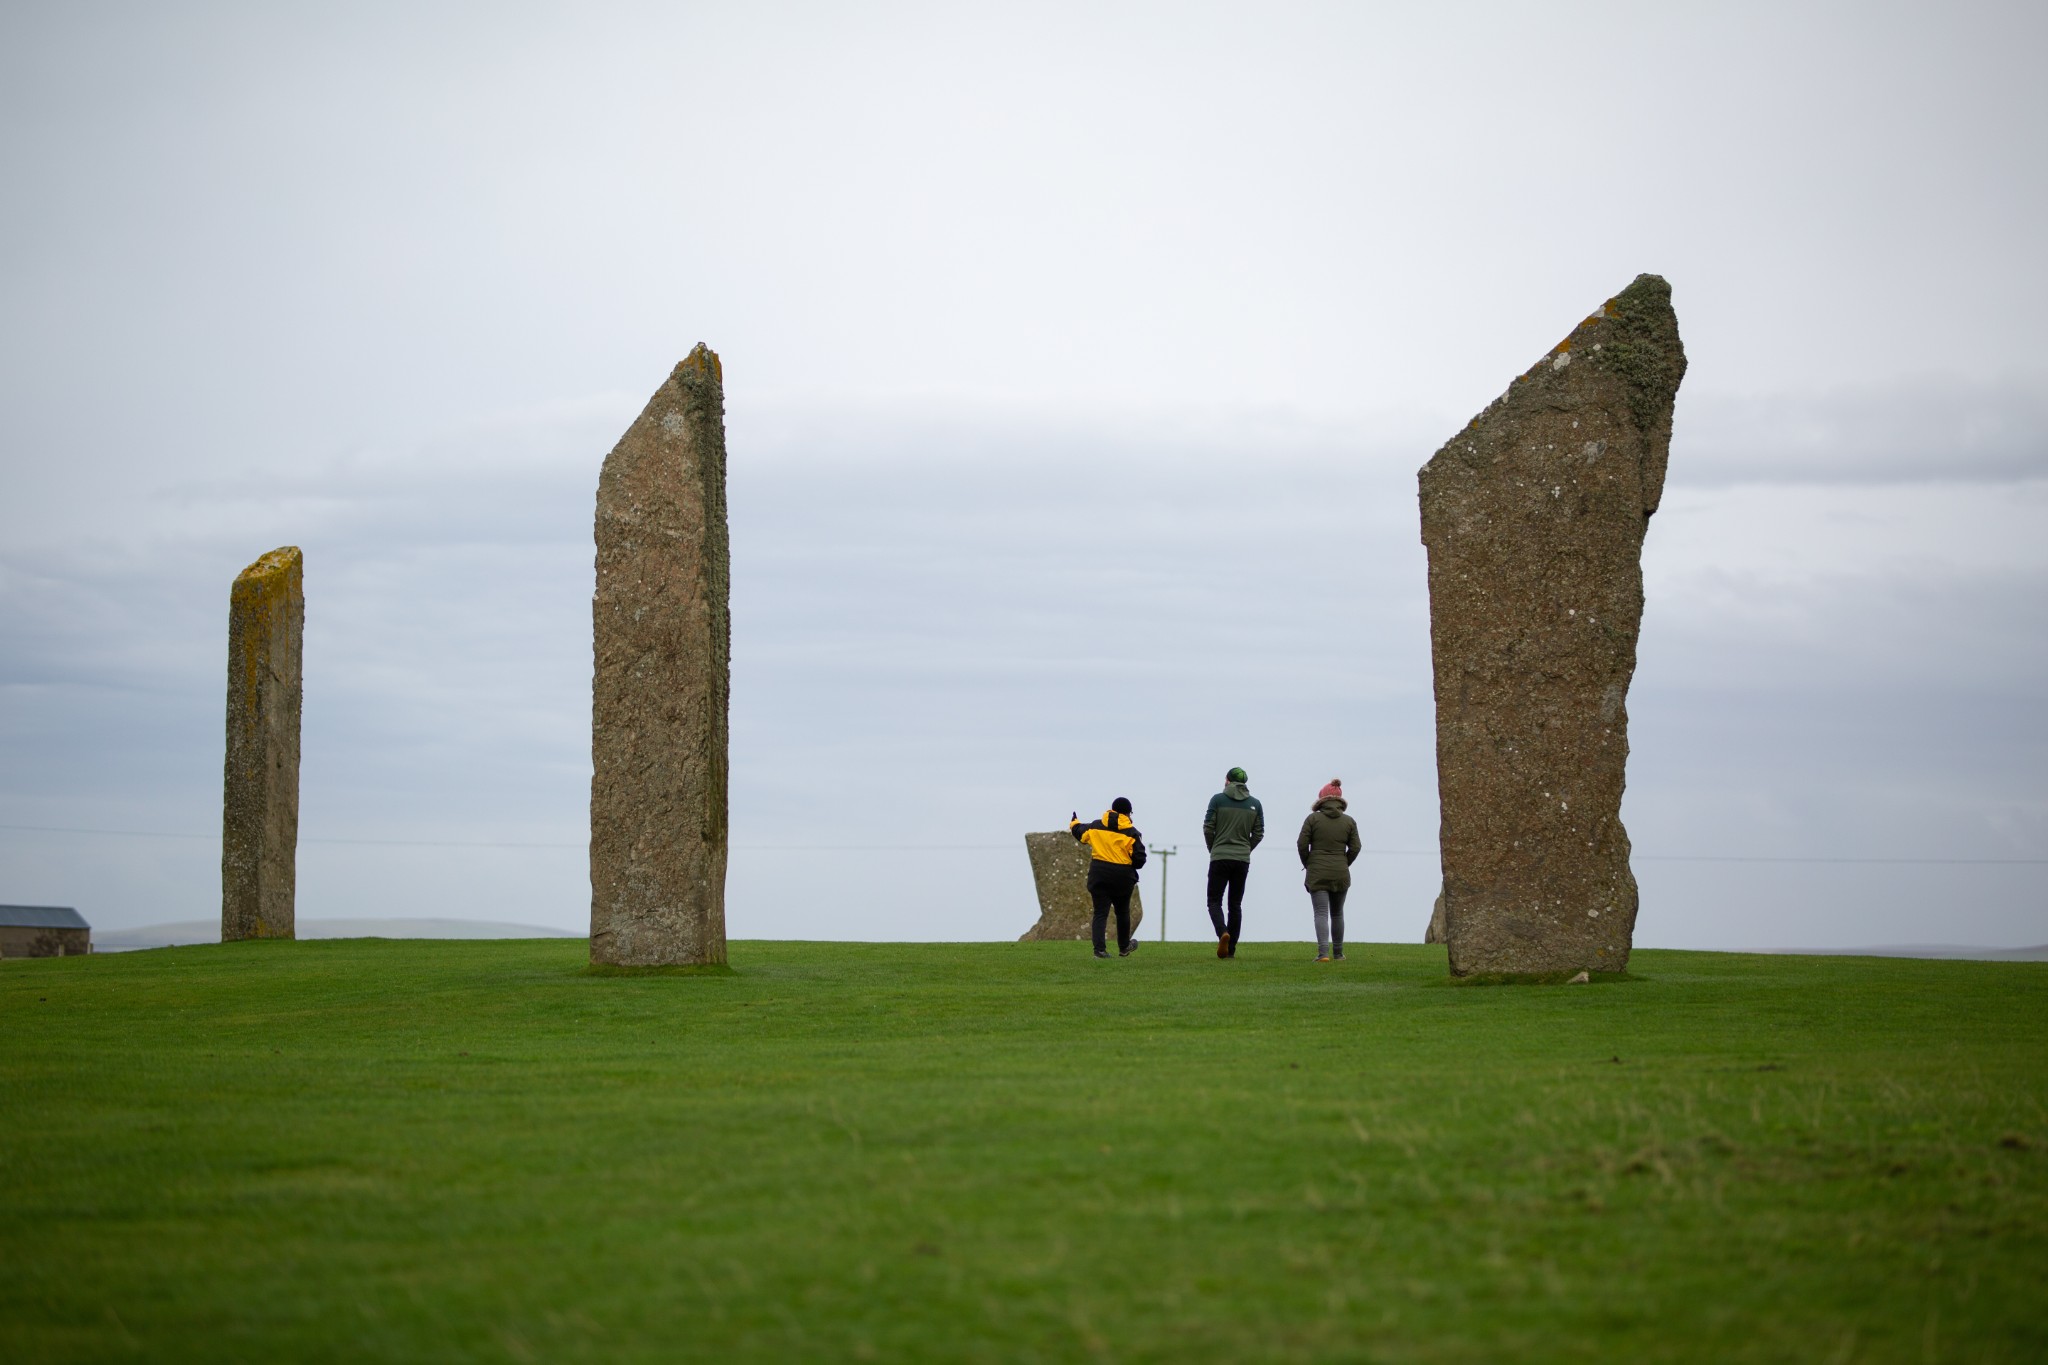 Guided tour at the Standing Stones of Stenness